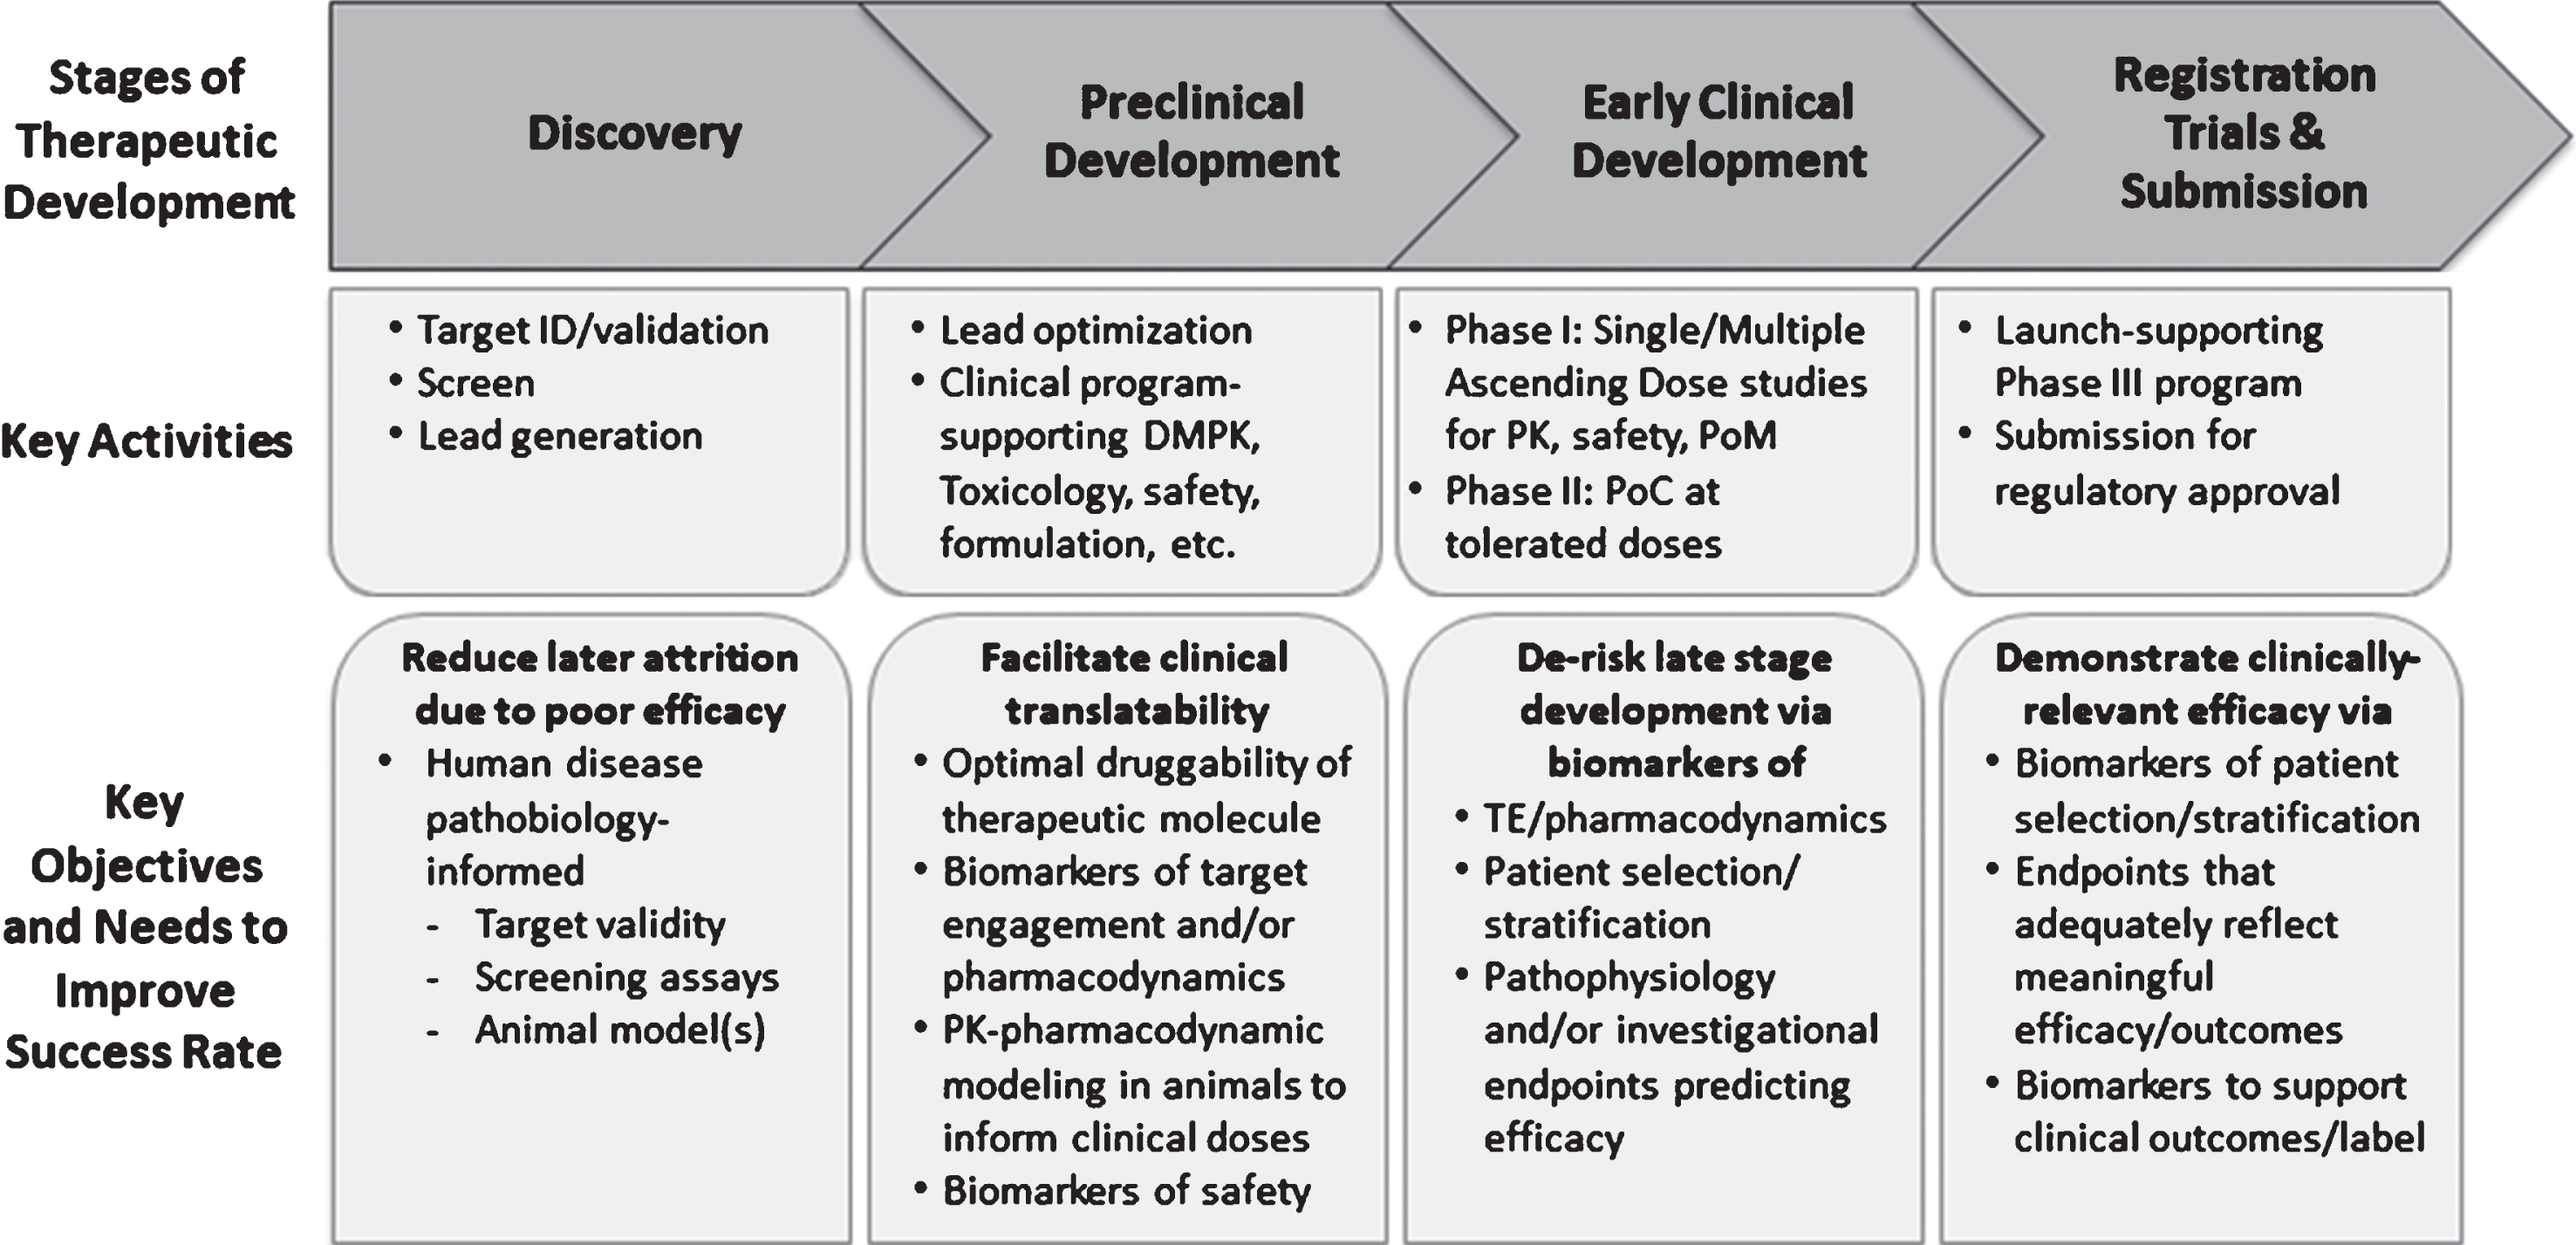 Key Stages of Therapeutic Discovery and Development. Key stages of therapeutic discovery and development and associated objectives aimed at improving the probability of technical success. Note the specific utility of biomarkers to inform preclinical and clinical decisions during each stage. DMPK, drug metabolism and pharmacokinetics; ID, identification; PK, pharmacokinetics; PoC, proof of concept; PoM, proof of mechanism; TE, target engagement.